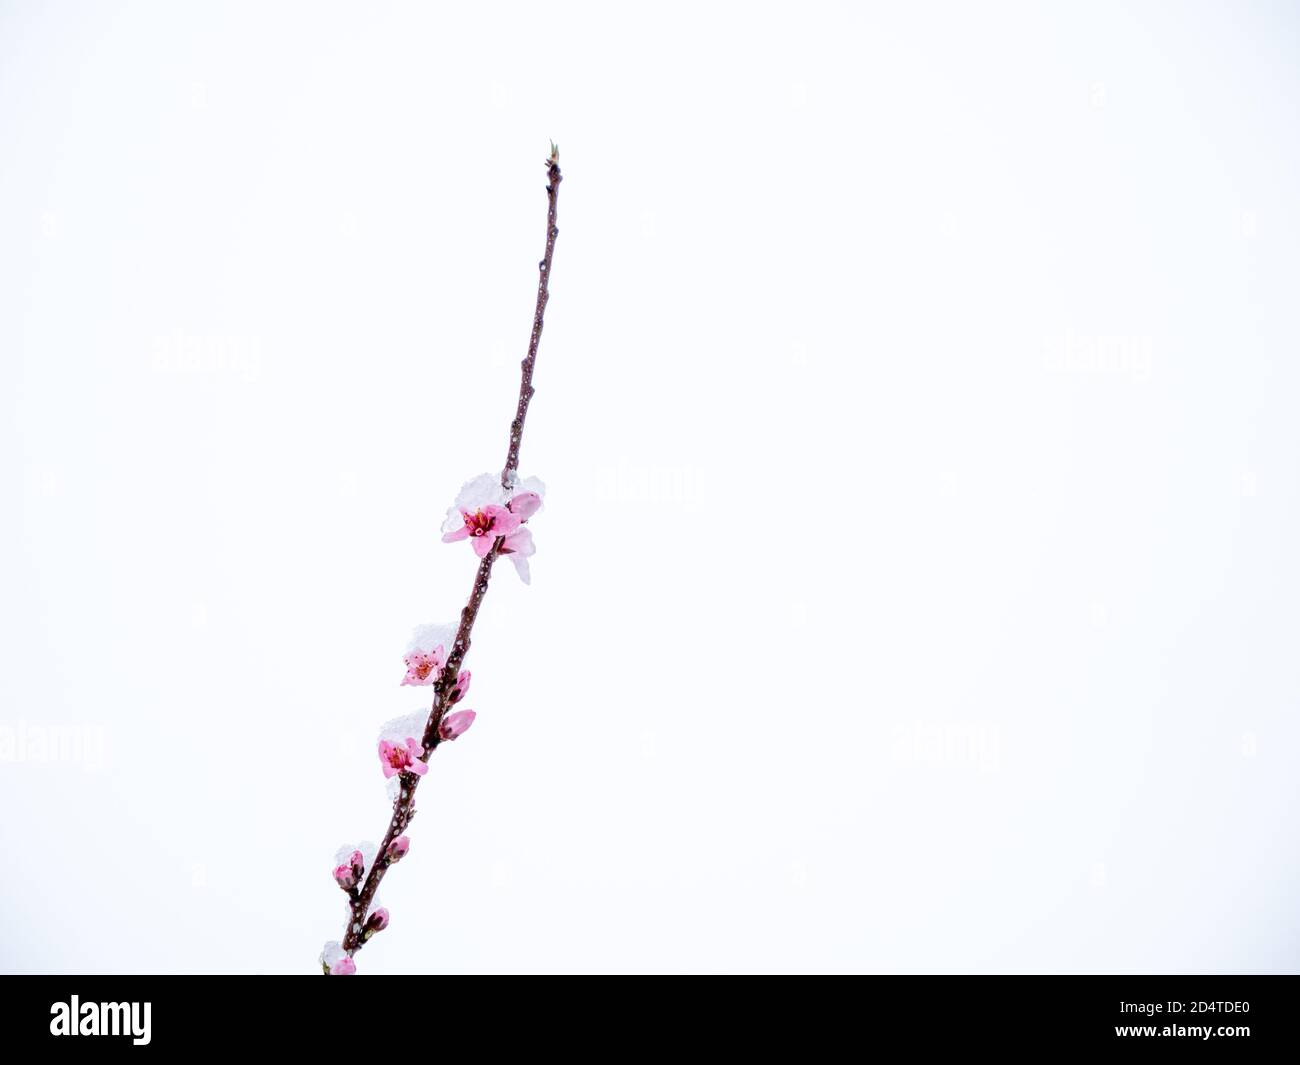 Peach flowers in bloom in the Japanese spring after a sudden and rare snowstorm Stock Photo